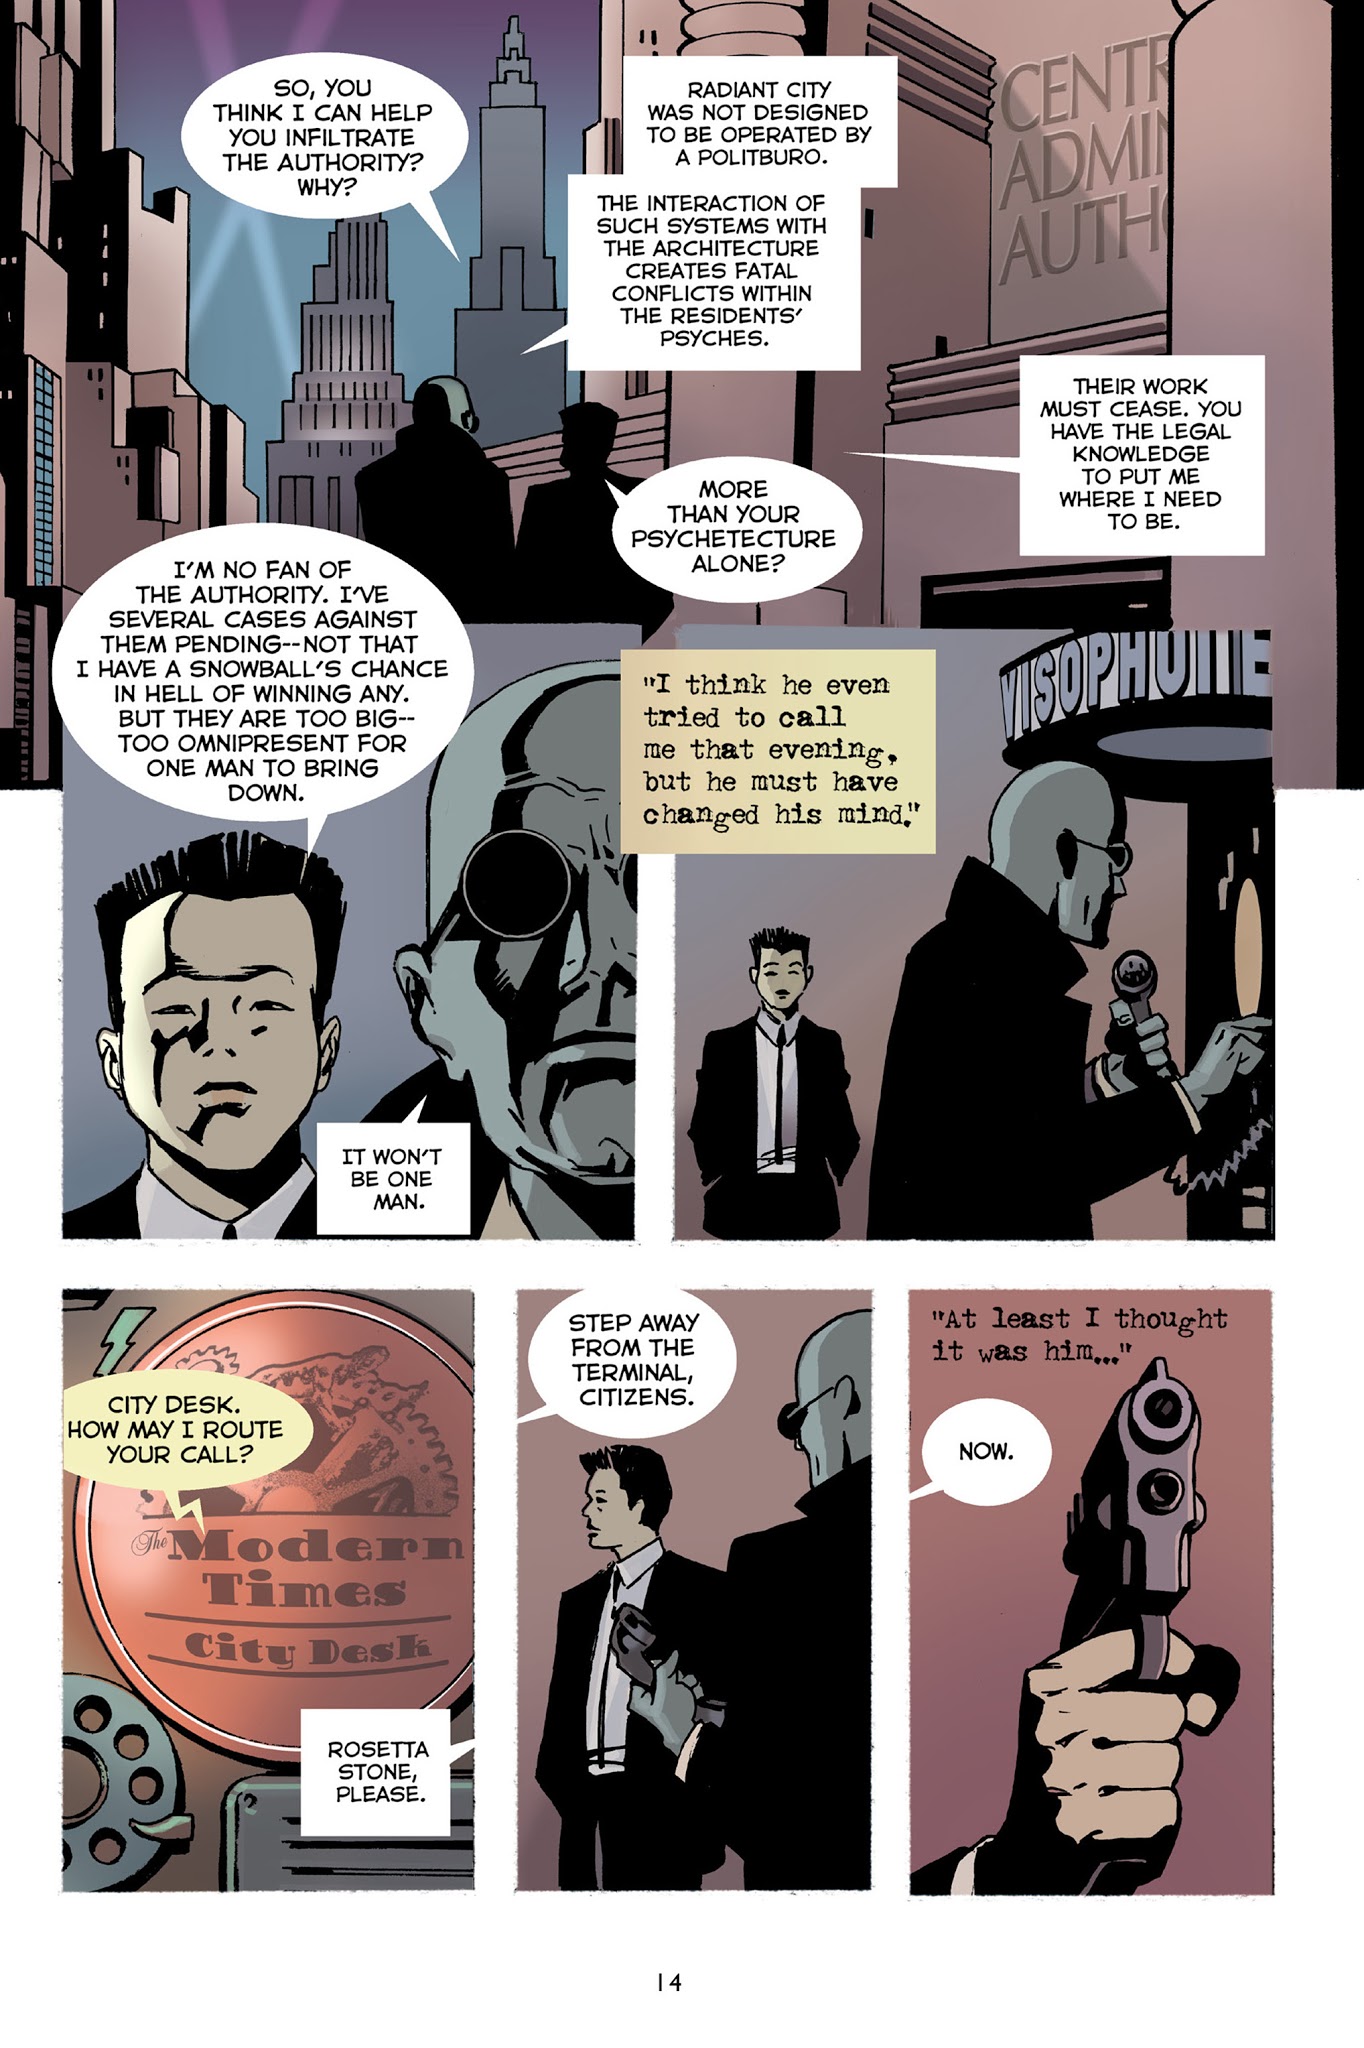 Read online Mister X: Eviction comic -  Issue # TPB - 15